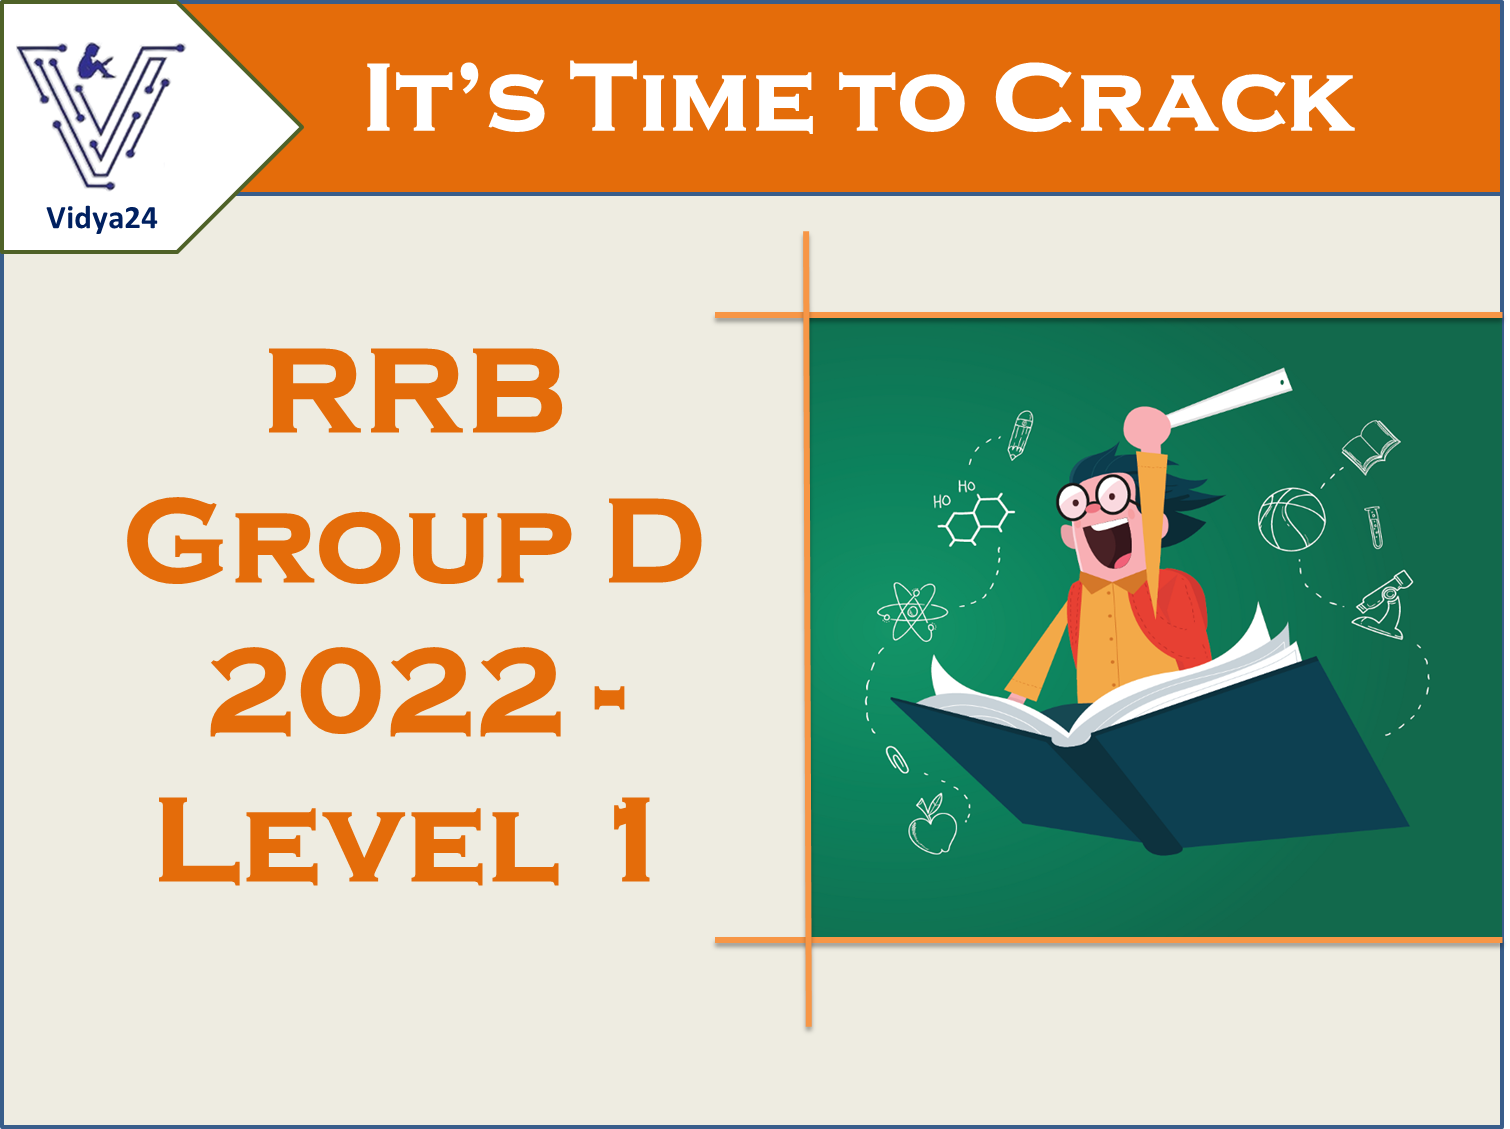 RRB Group D 2022 - Level 1